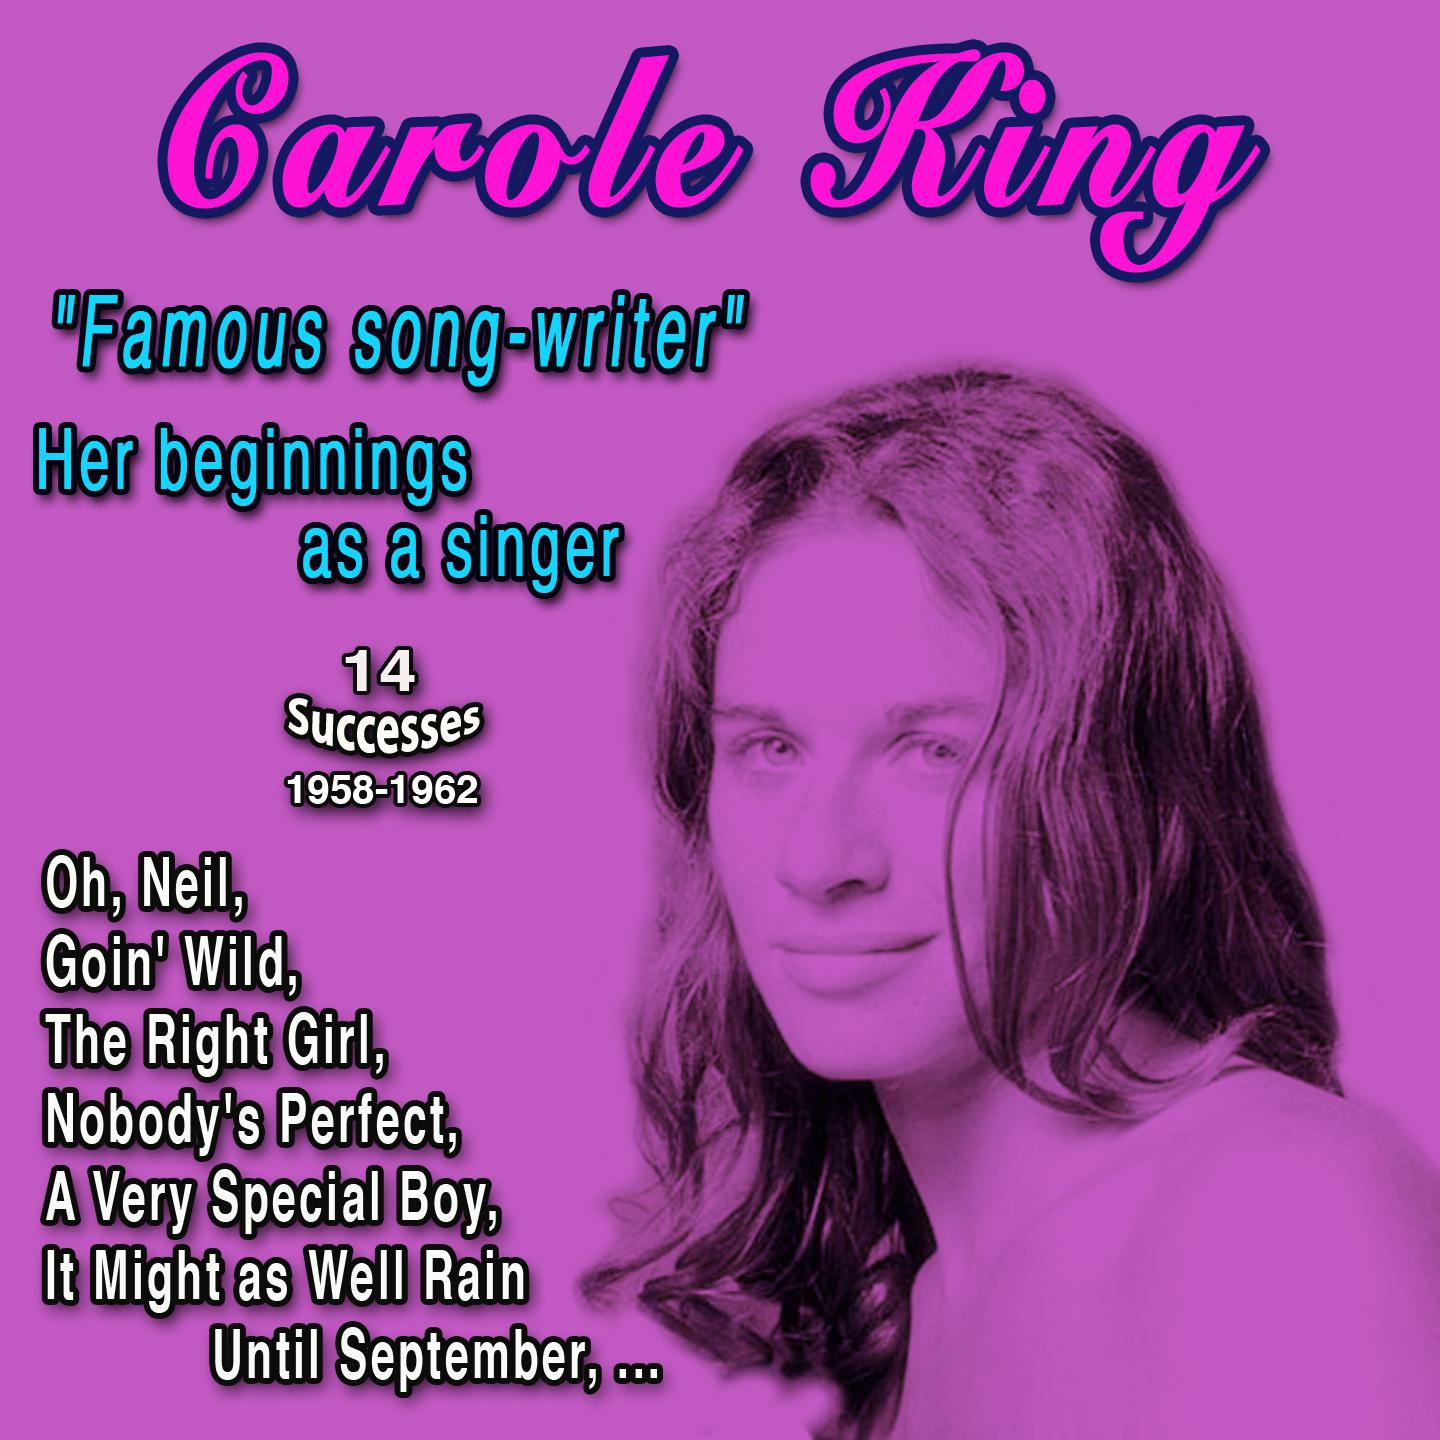 Постер альбома Carole King "Famous song-writer" Her beginnings as a singer